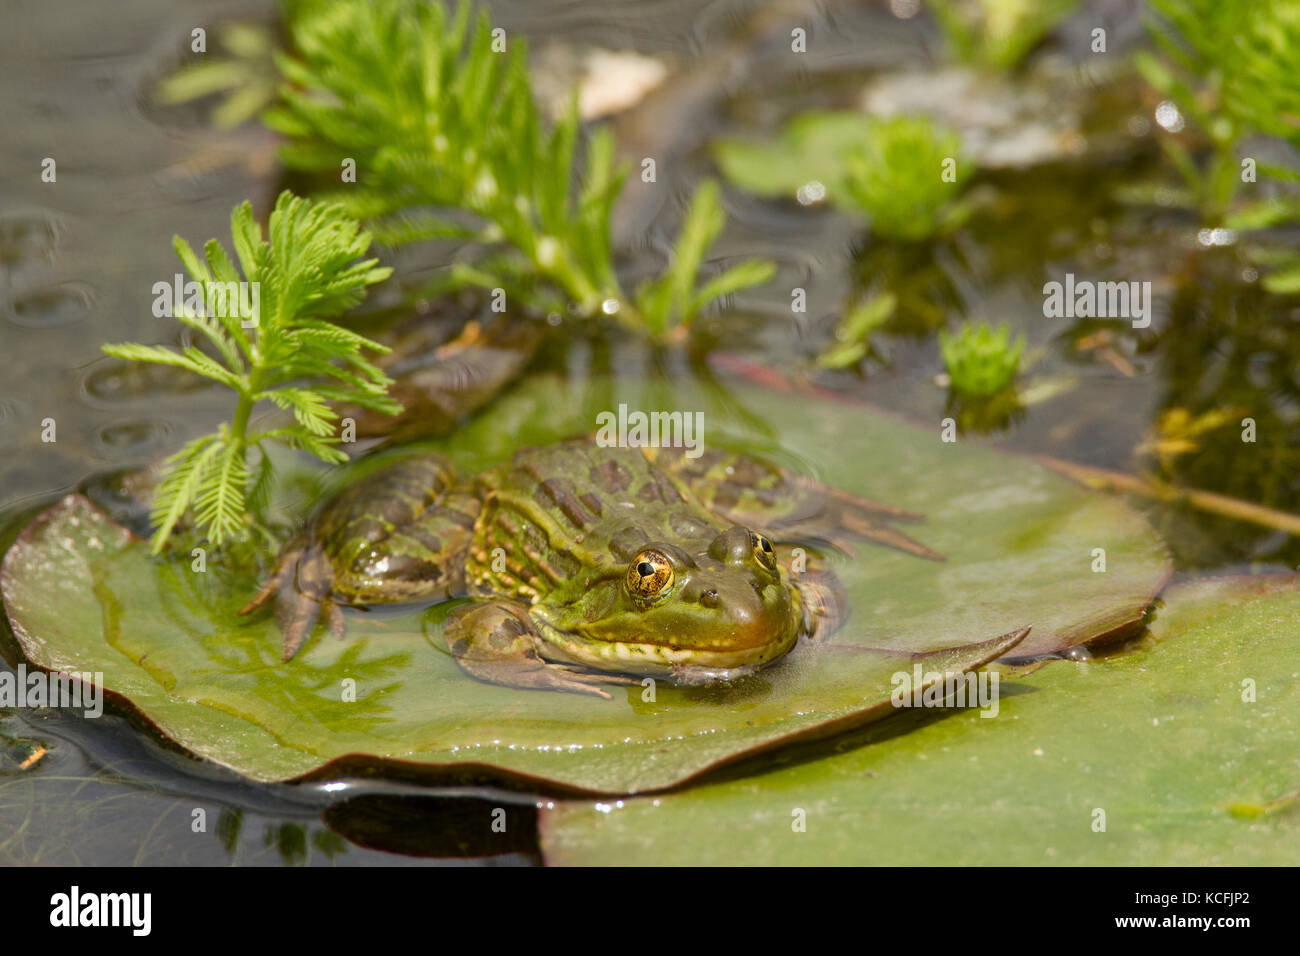 Chiracuah Leopard Frog, Chiricuah Leapard Frog, Sonoran Desert, United States, USA Stock Photo